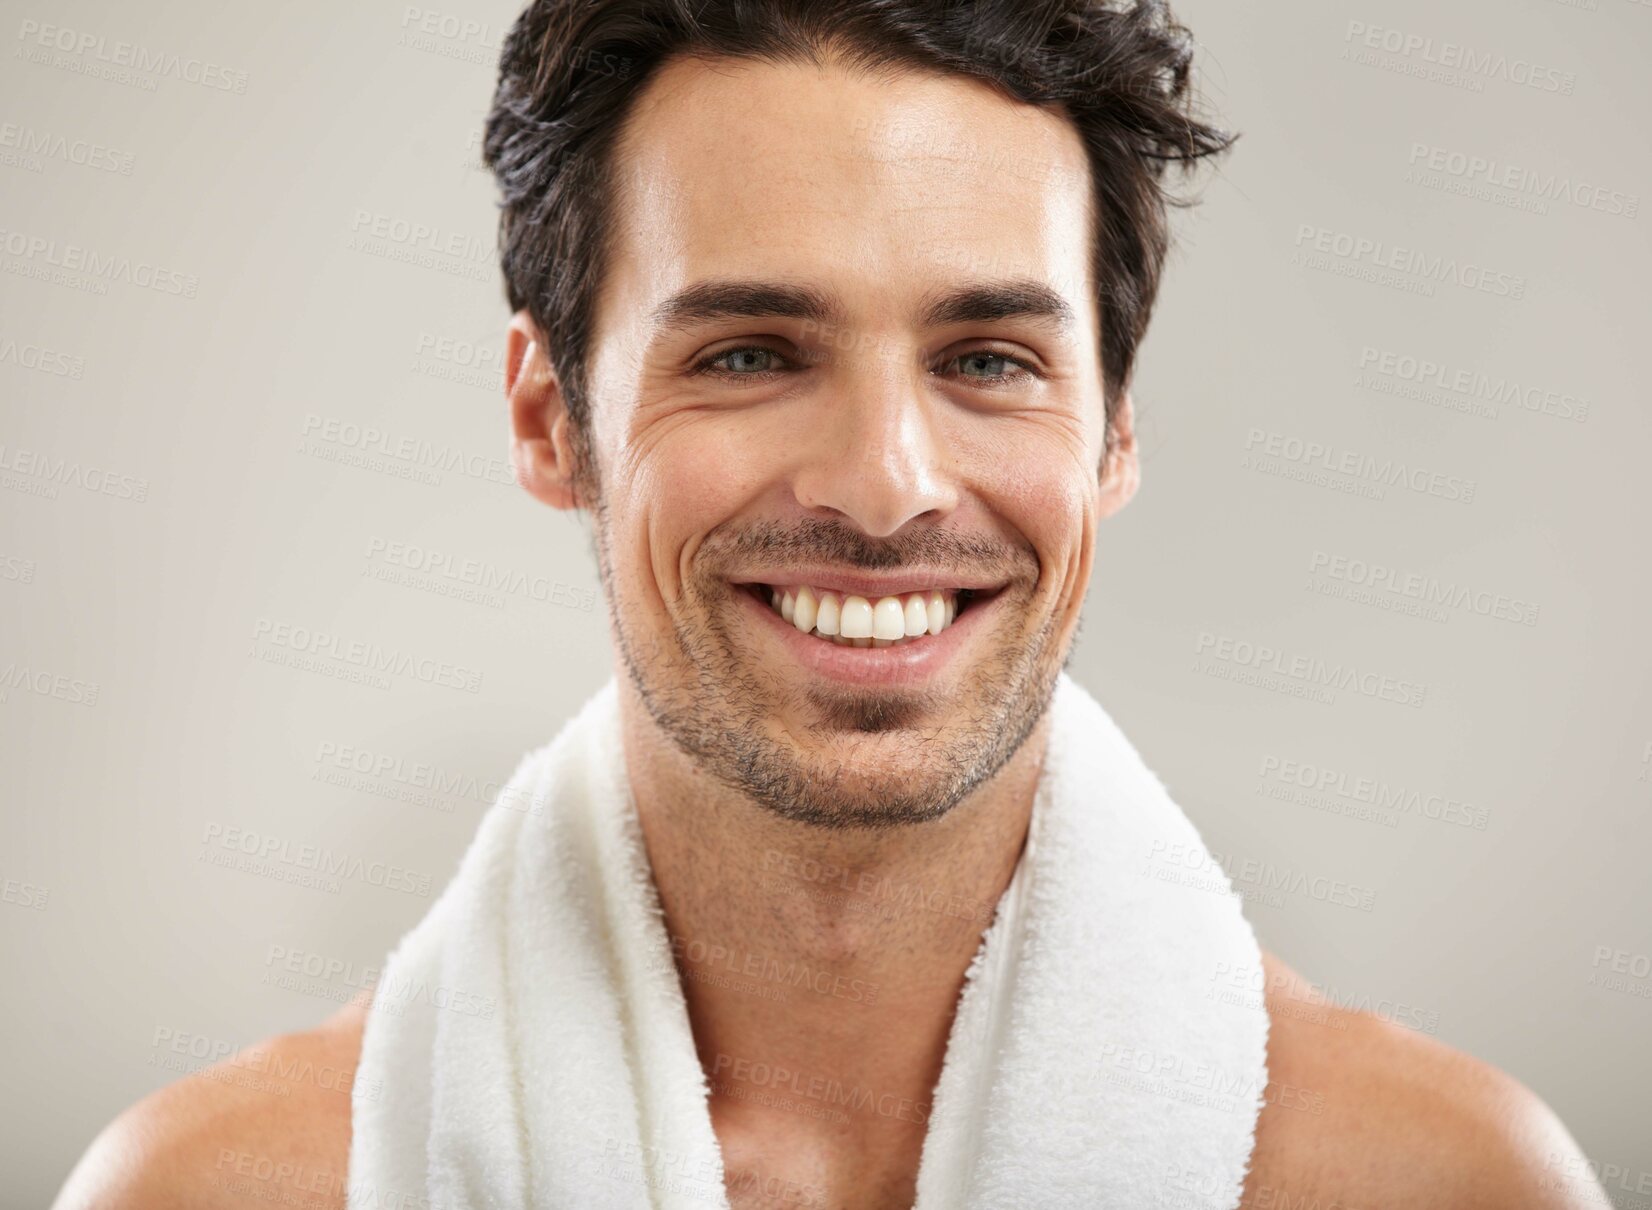 Buy stock photo Towel, portrait or happy man in studio for fitness workout, sports exercise or healthy wellness. Smile, grey background or model athlete ready to start training with confidence, discipline or pride